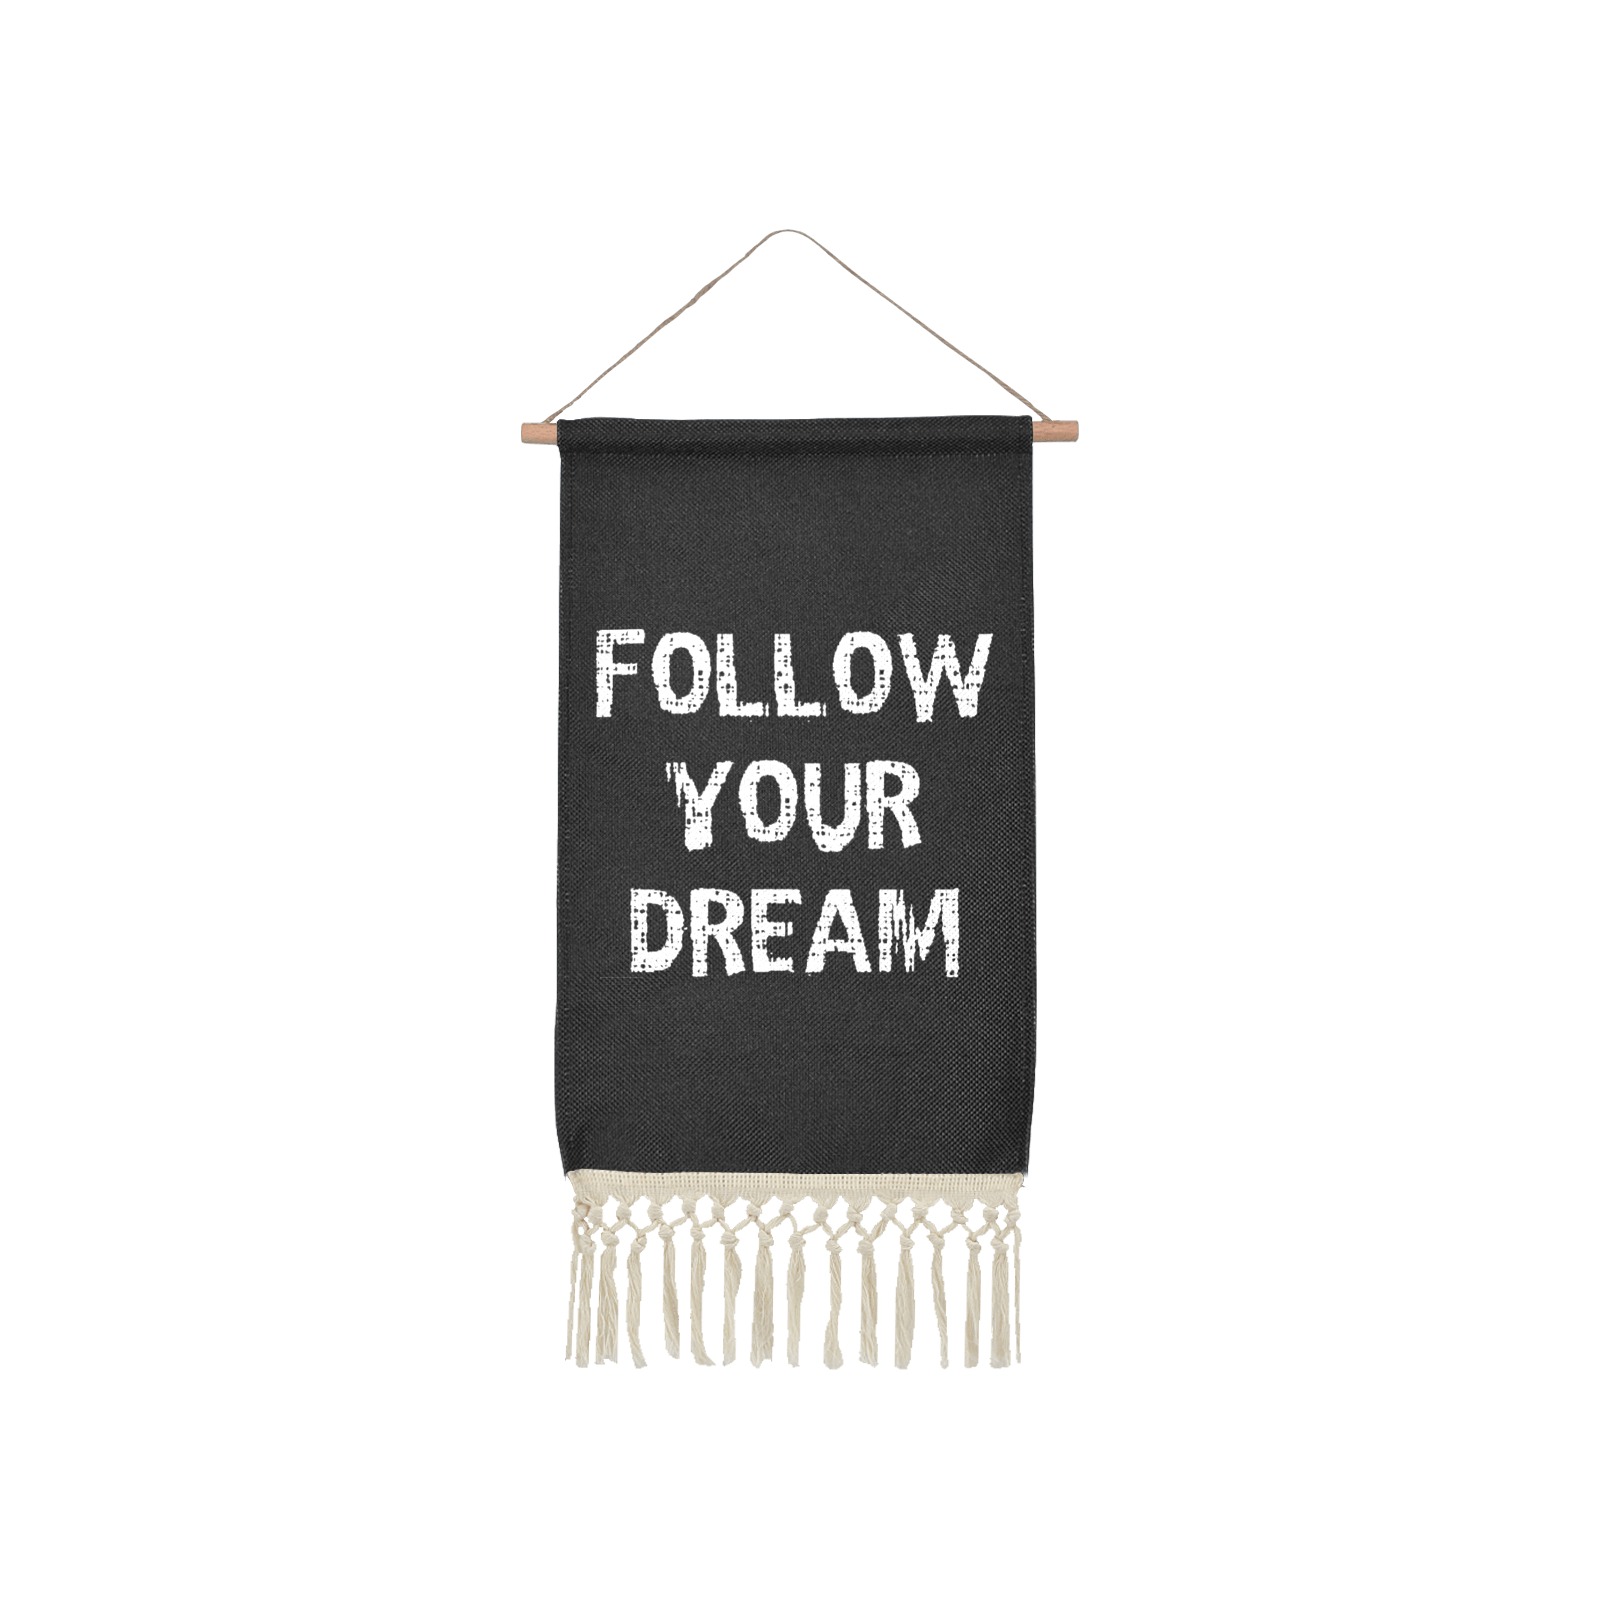 Follow your dream cool awesome white text. Linen Hanging Poster